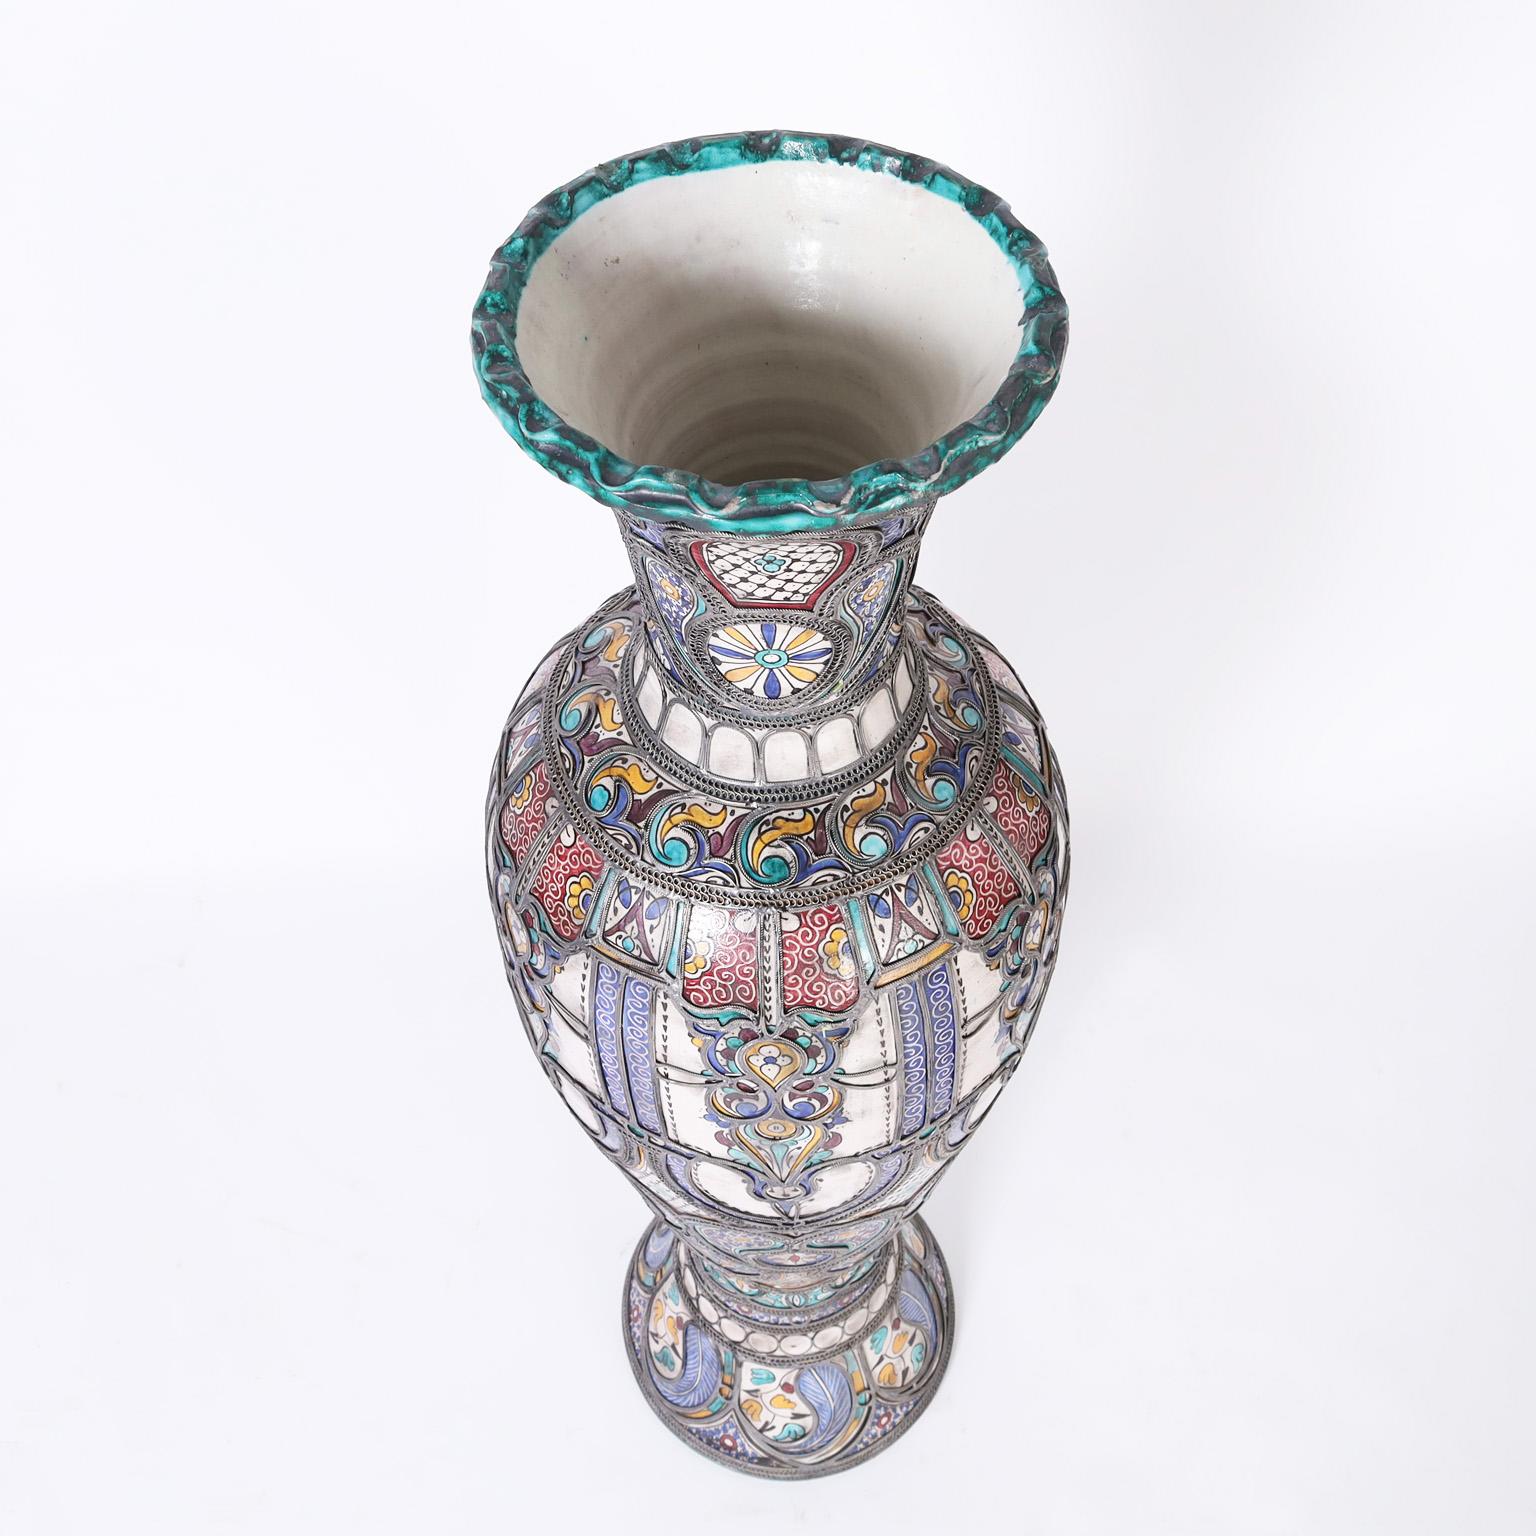 Tall glazed terra cotta urn decorated in traditional mediterranean colors and having jewelry like metalwork overlays that ups the wow factor. Best of the genre.